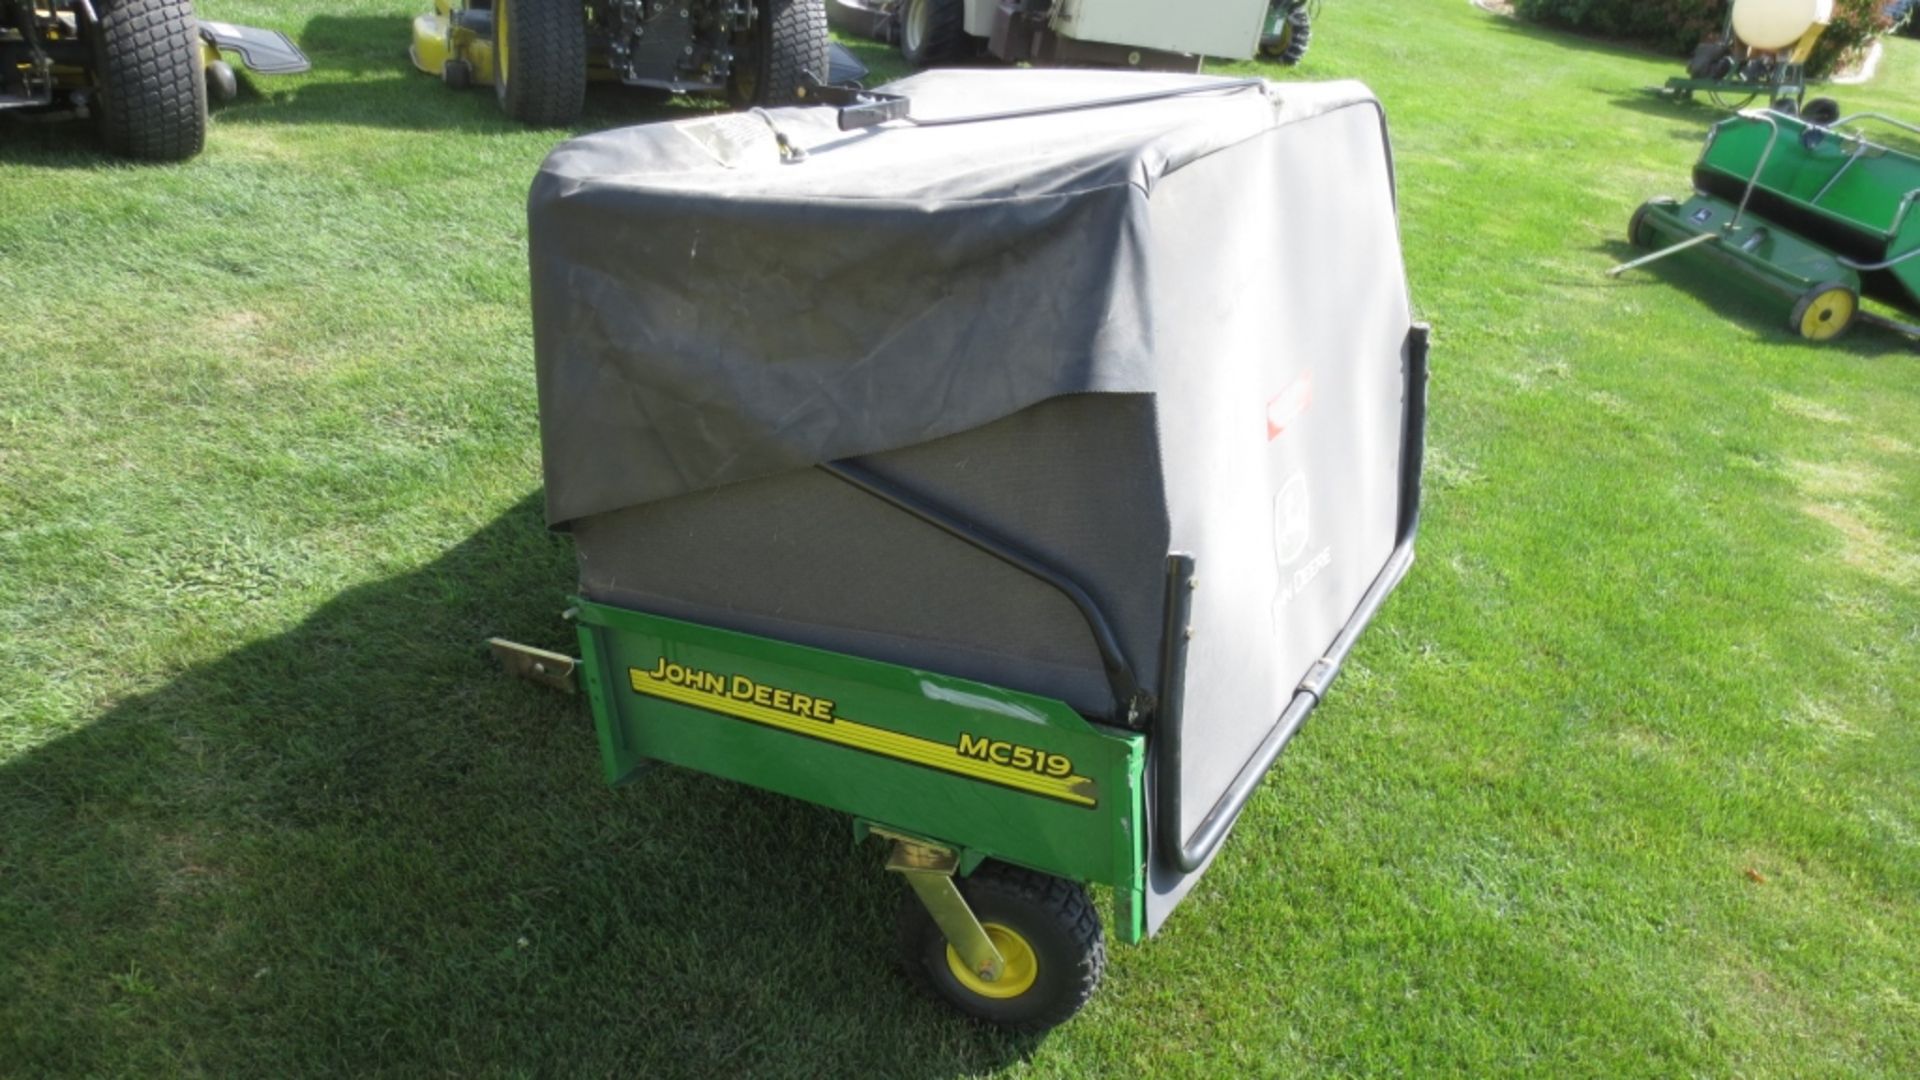 John Deere MC519 collection system for rider mower Rear mount grass & leaf collection system for - Image 5 of 5